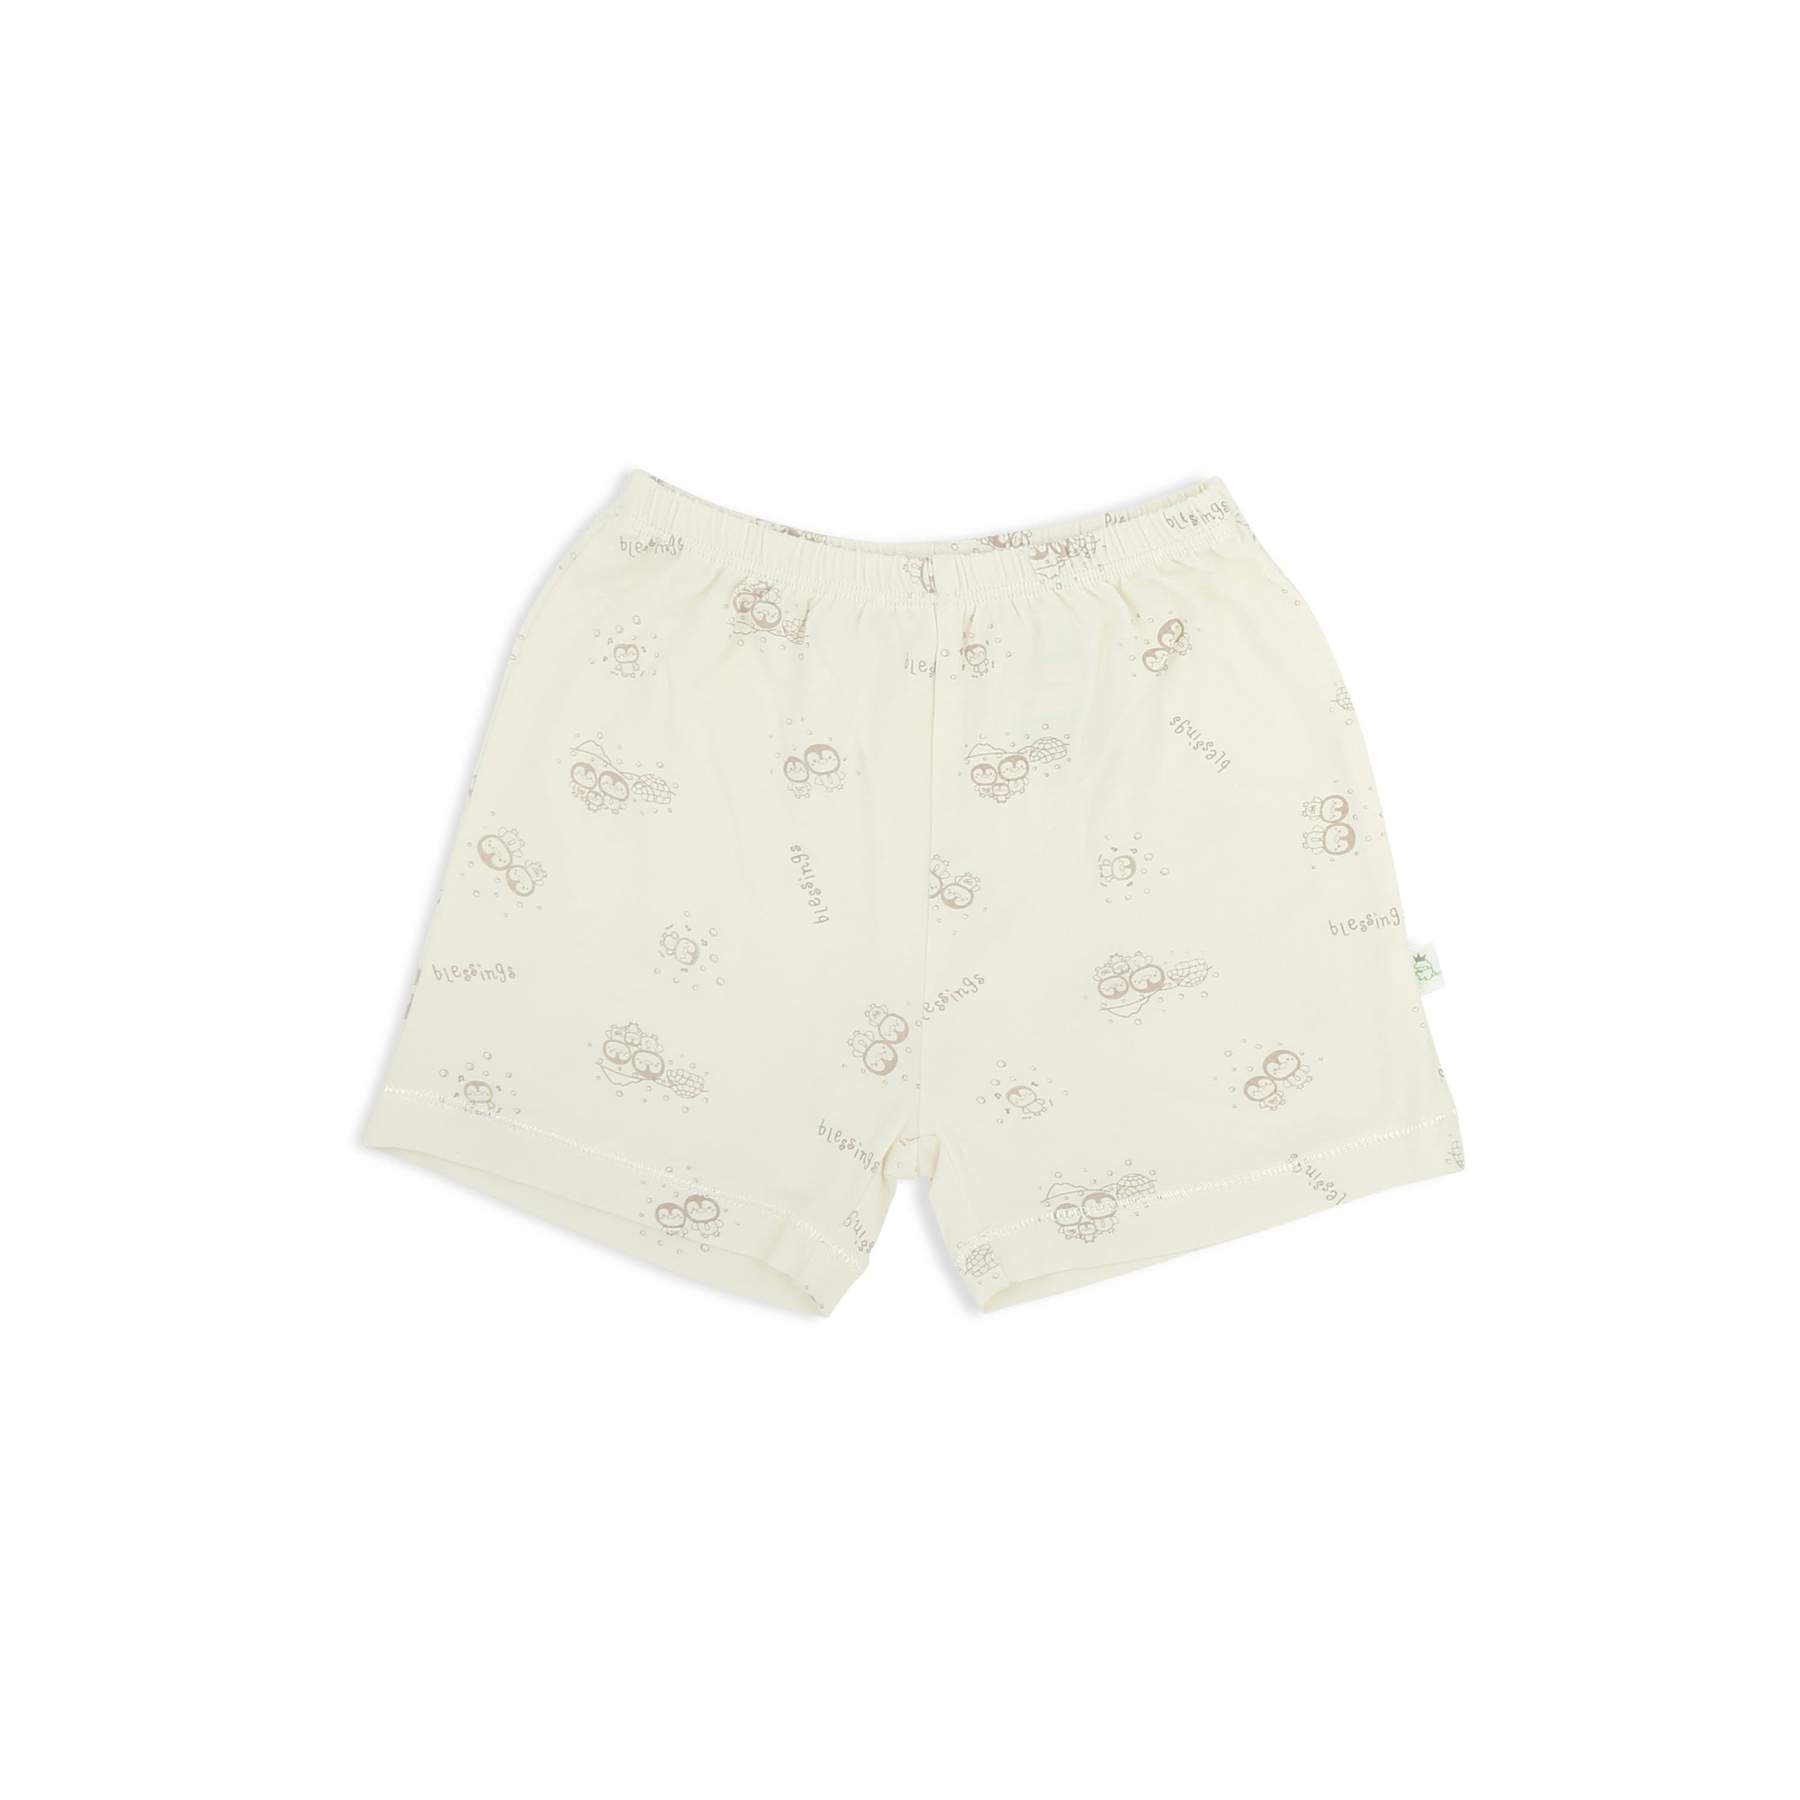 Simply Life Bamboo Shorts Footie Blessed Penguin (Various Sizes Avail) 